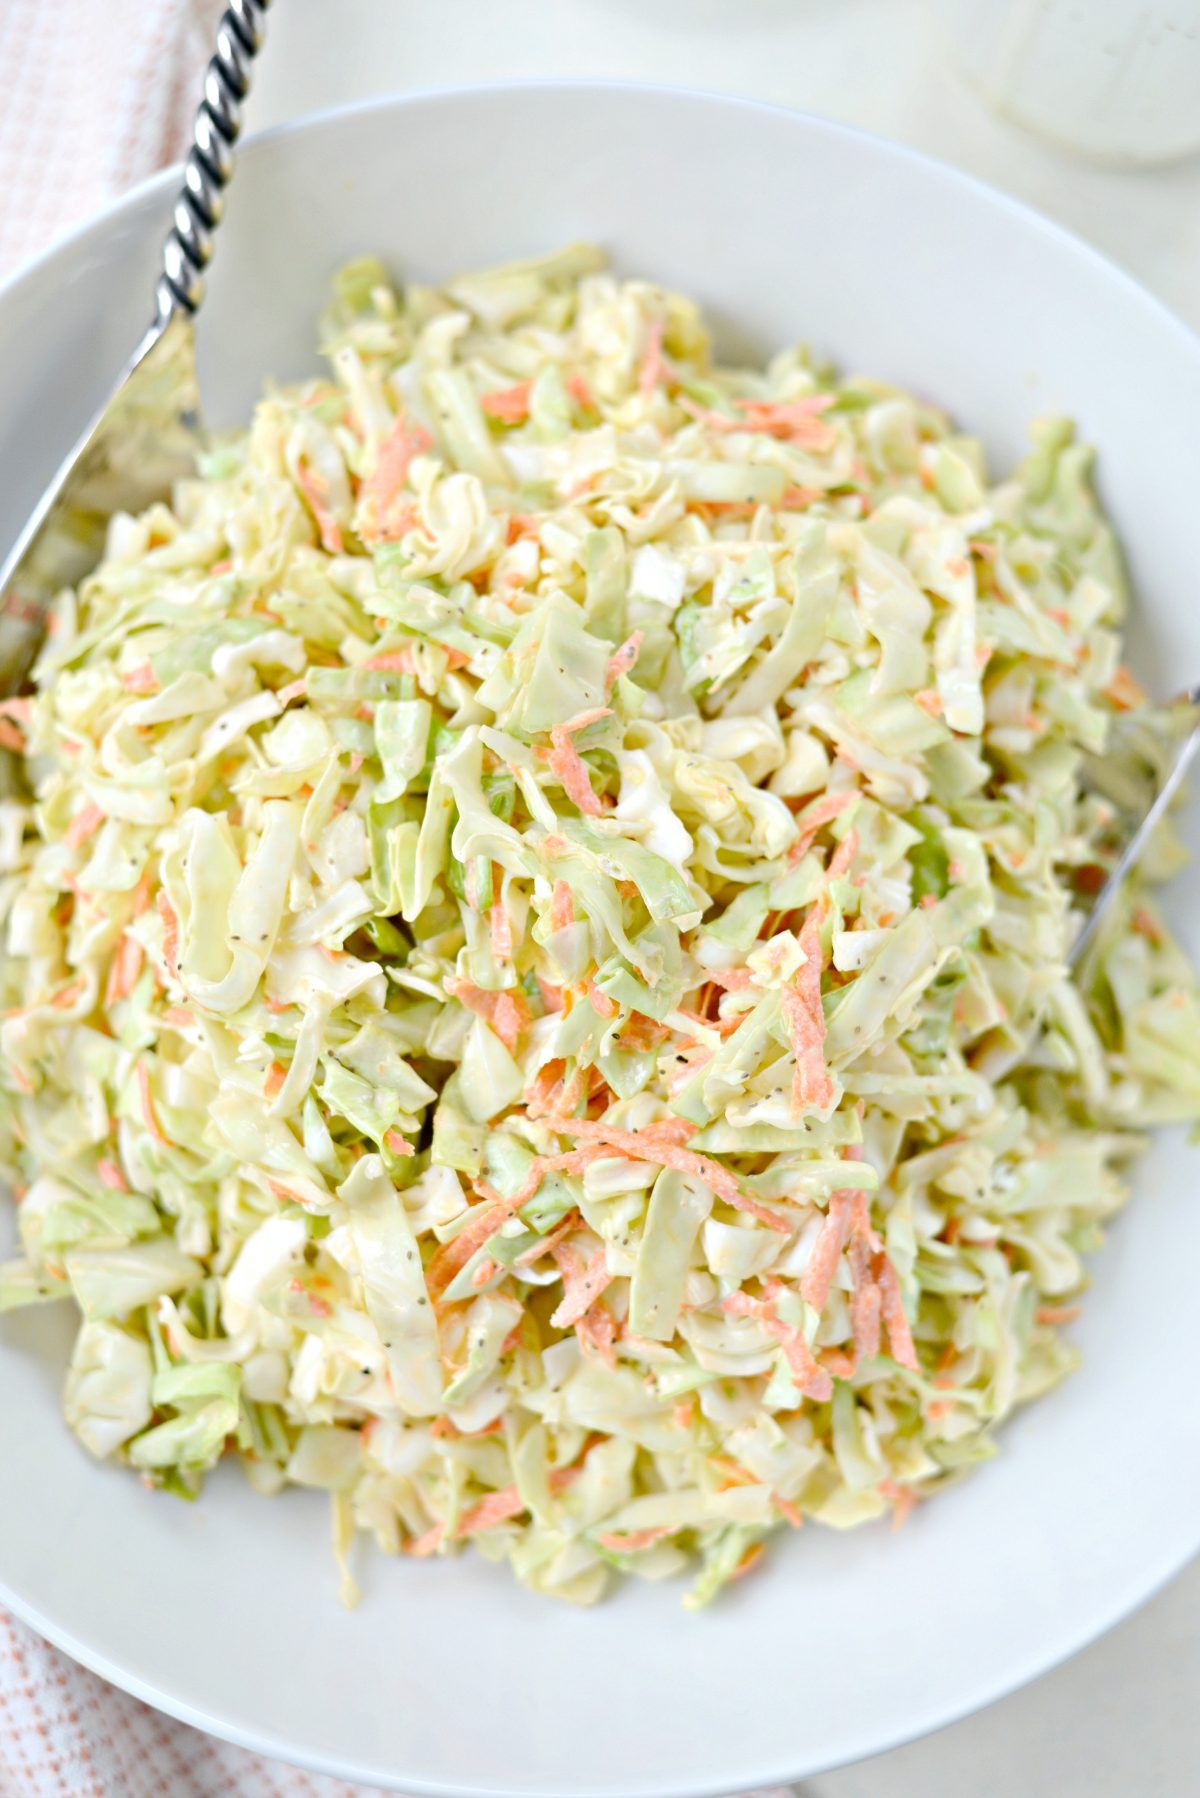 Simply Scratch Classic Coleslaw Recipe with Homemade Dressing - Simply